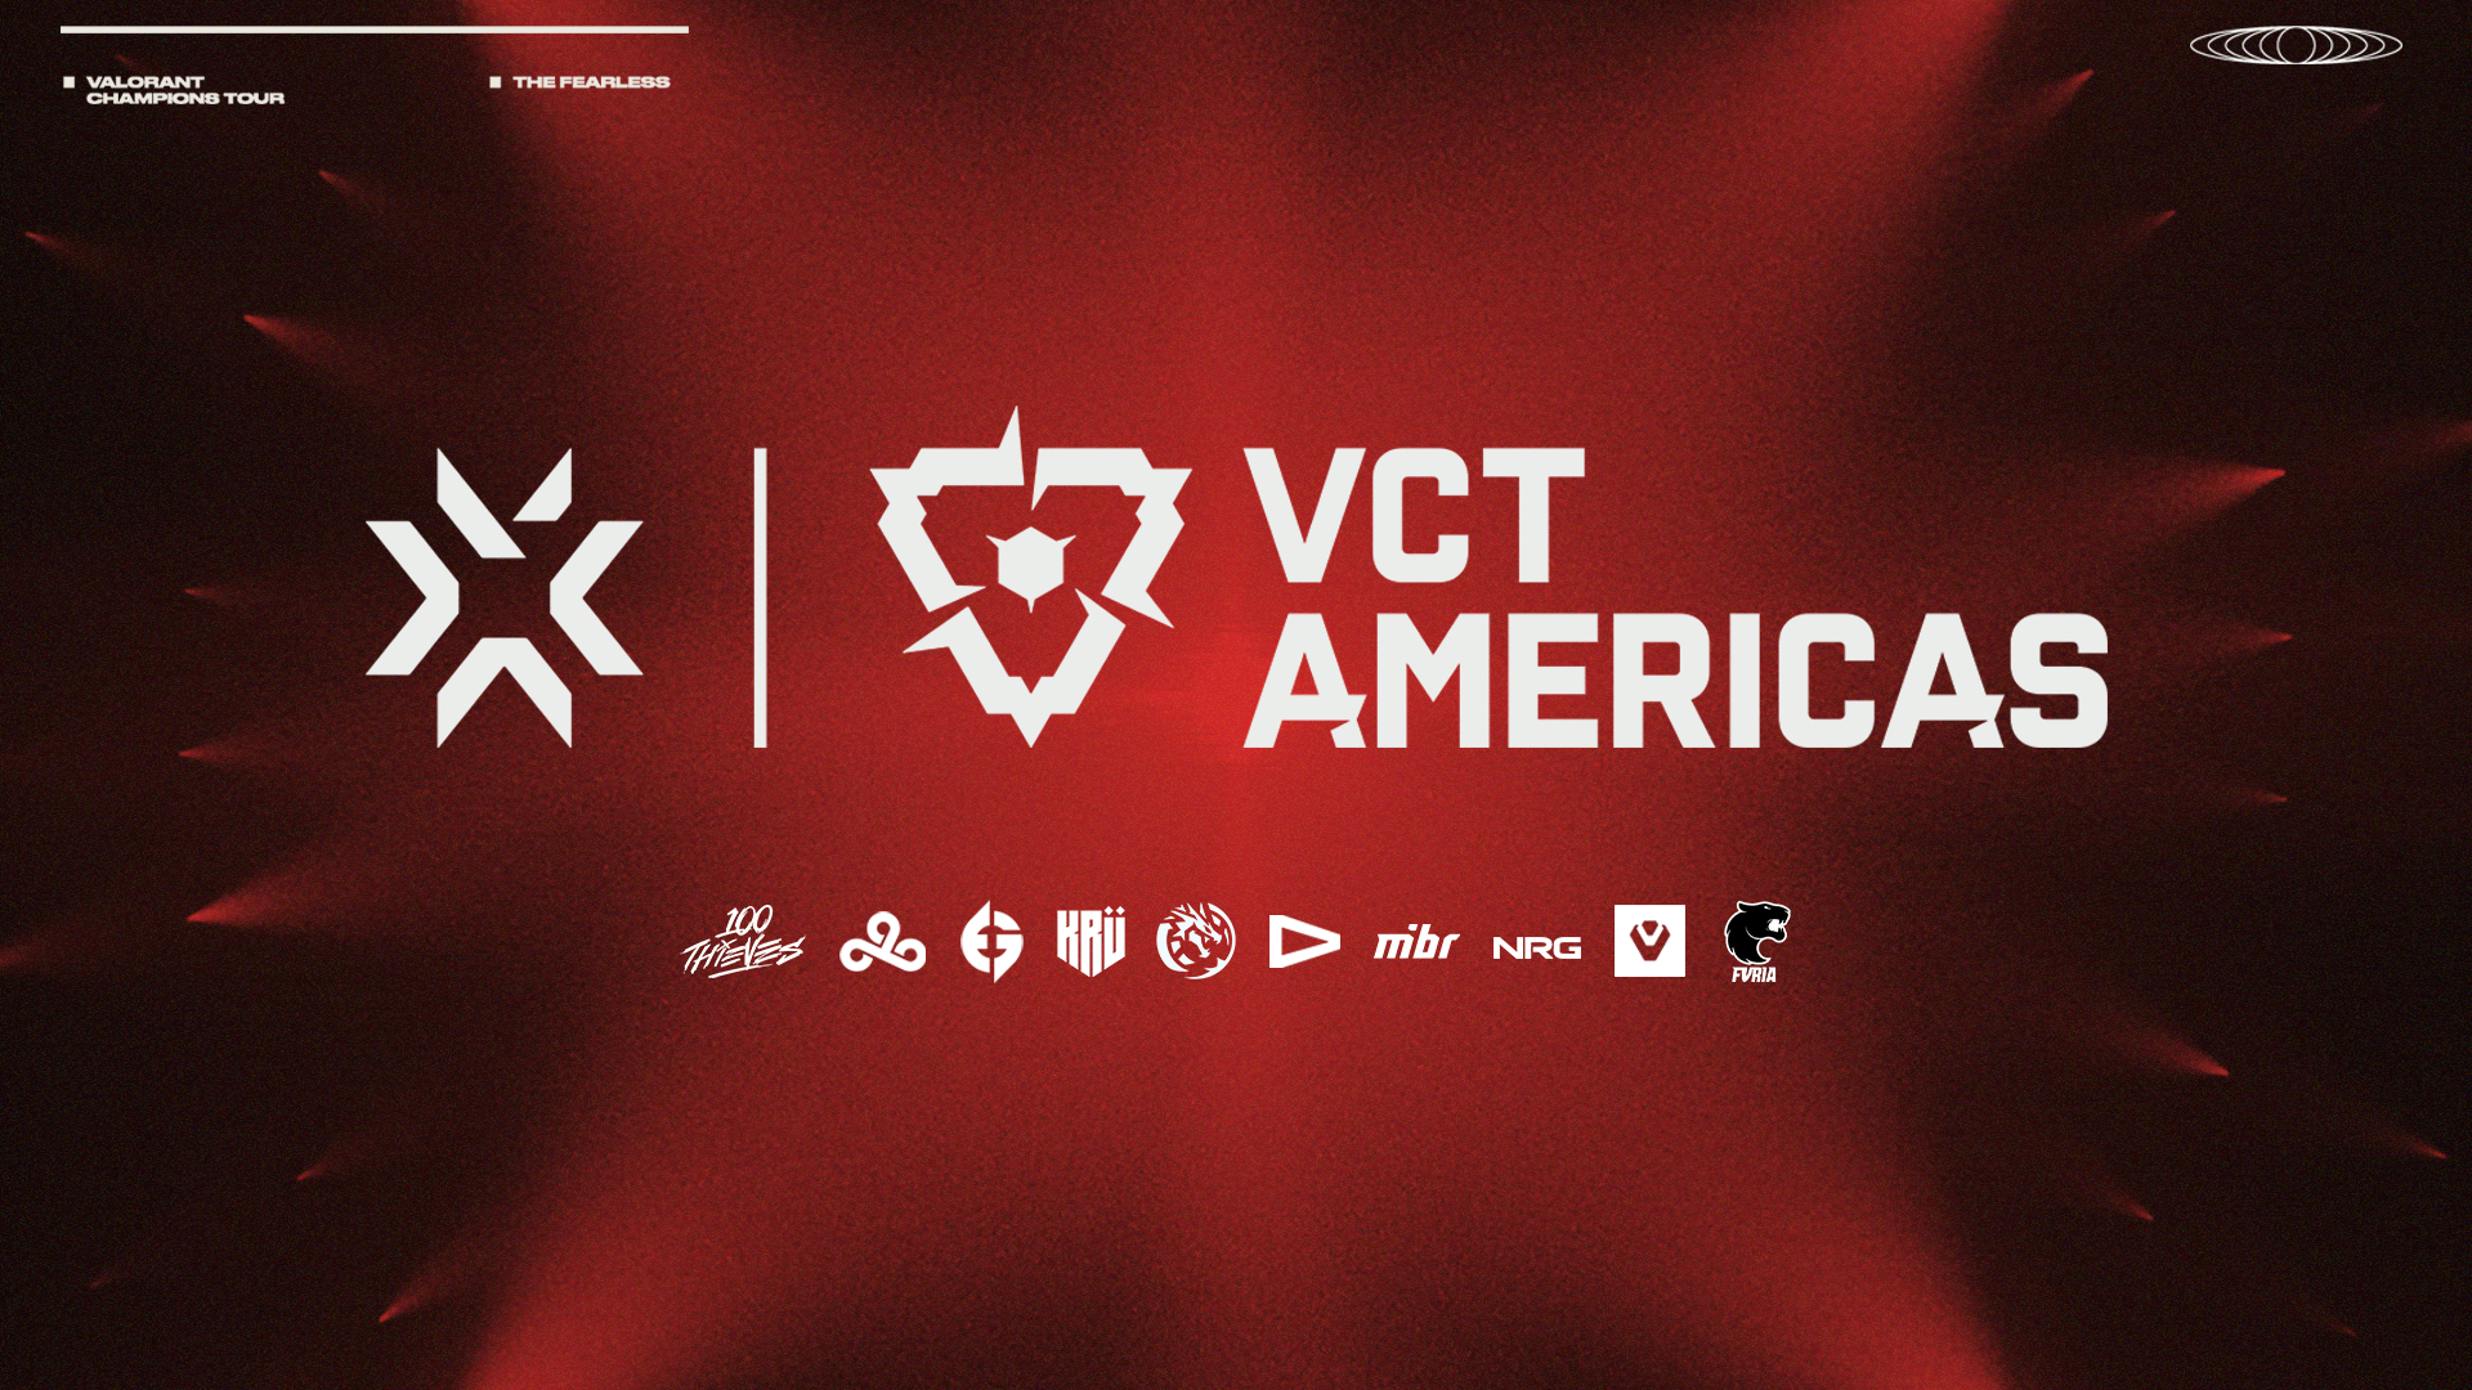 VCT 2023 to kick off new format with 3-week international in Brazil